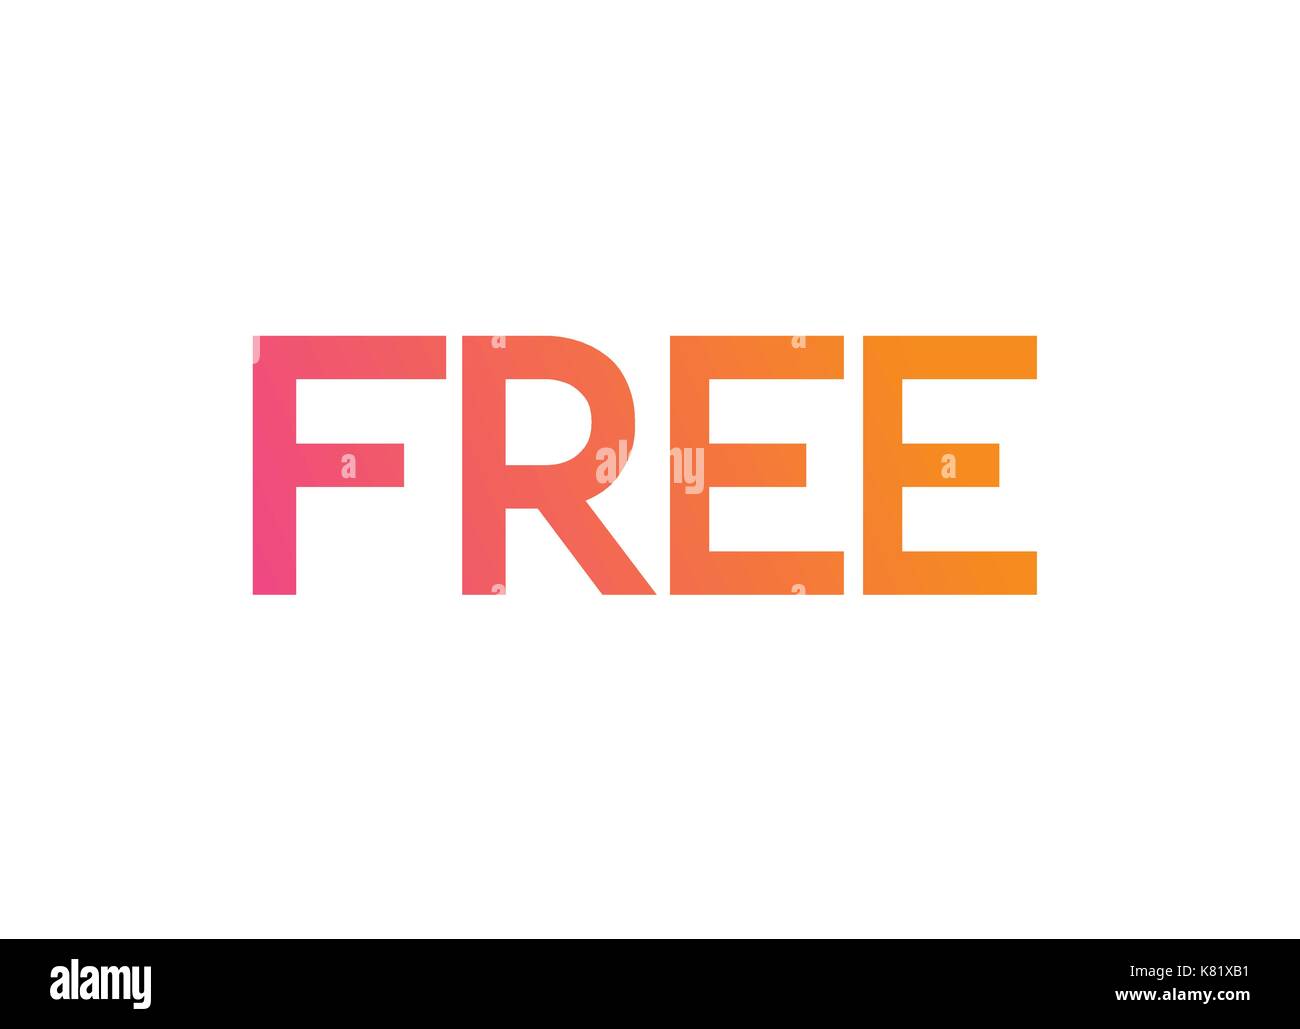 The Colorful gradient pink to orange serif font keyword FREE Stock Vector